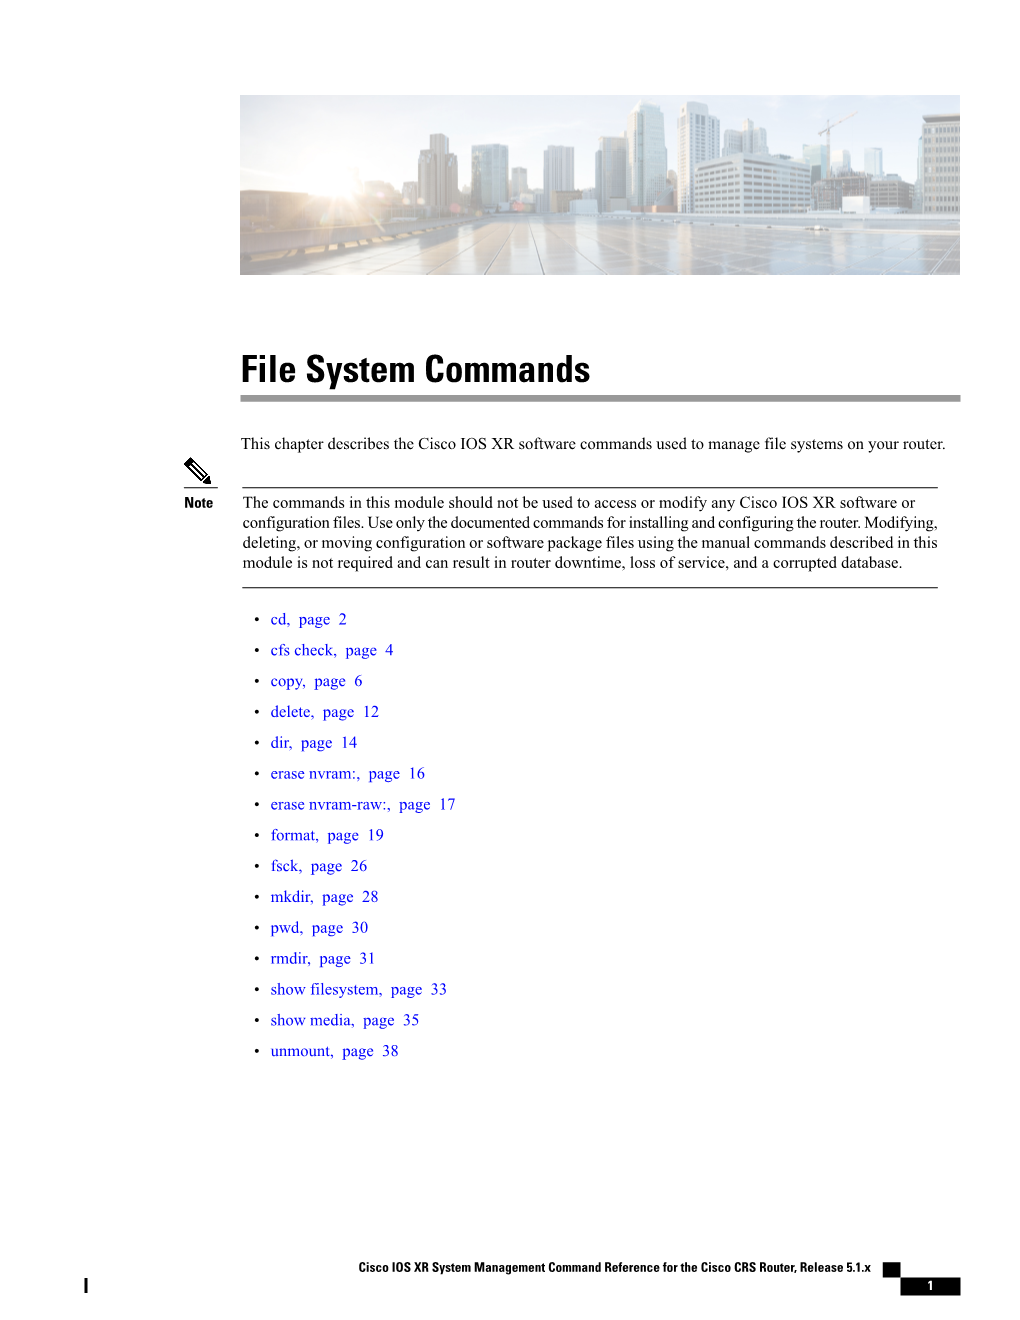 File System Commands